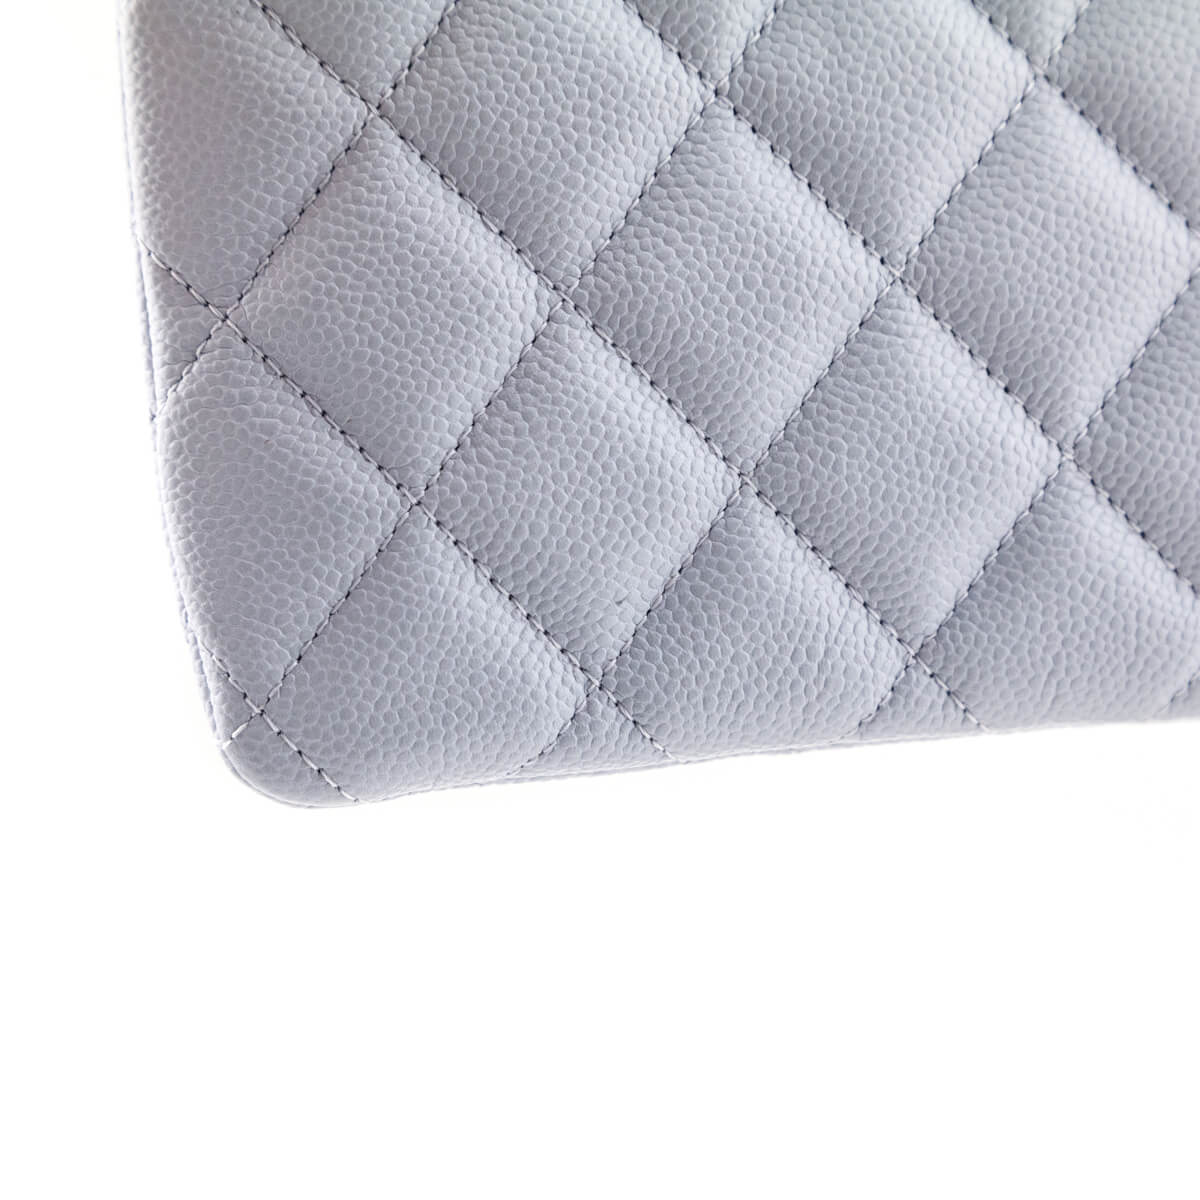 Chanel Ice Blue Gray Caviar Quilted Small Pouch - Love that Bag etc - Preowned Authentic Designer Handbags & Preloved Fashions